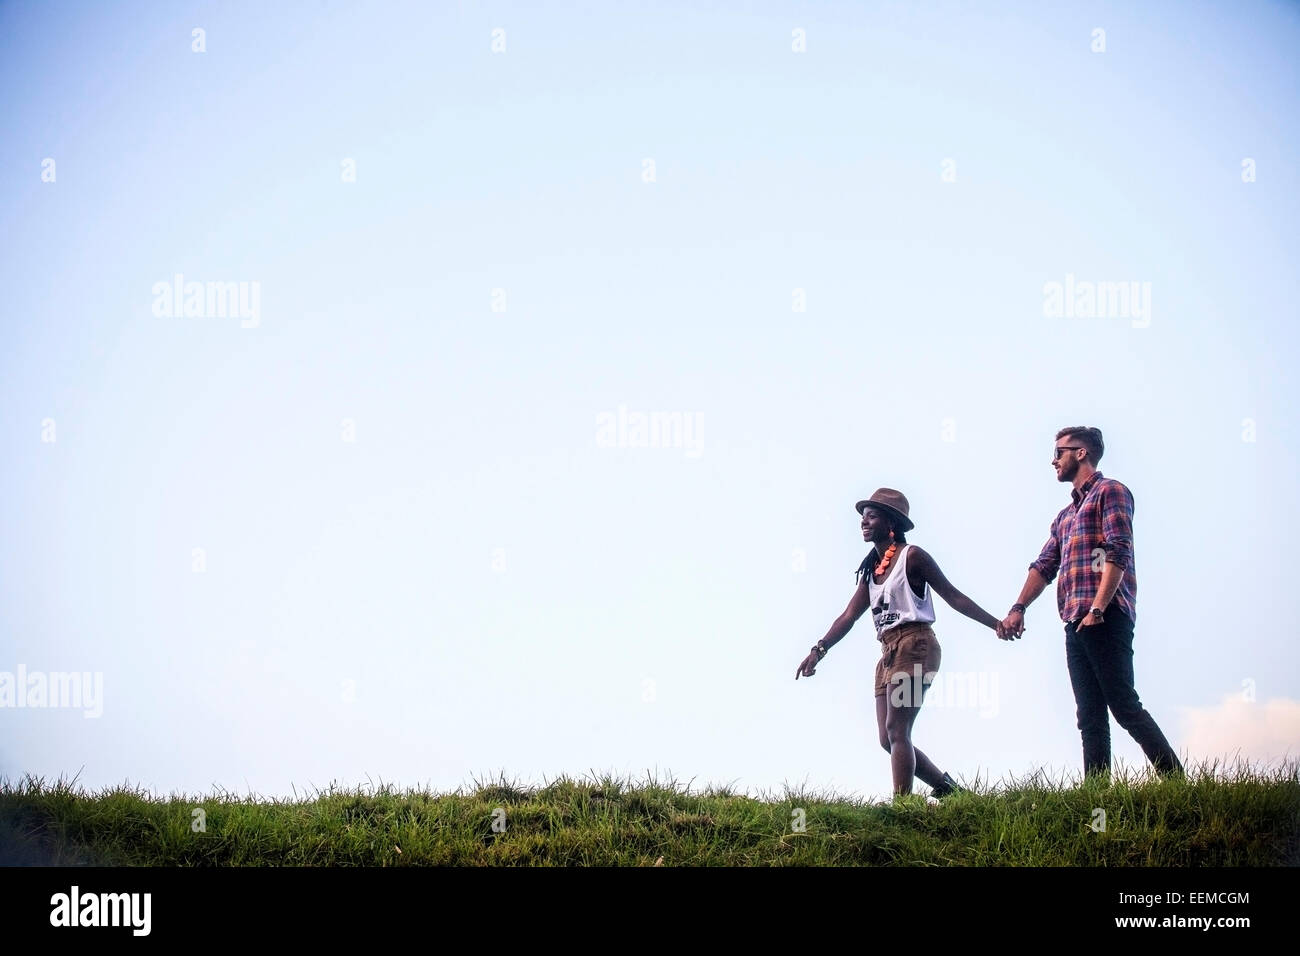 Couple walking together in grassy field Banque D'Images